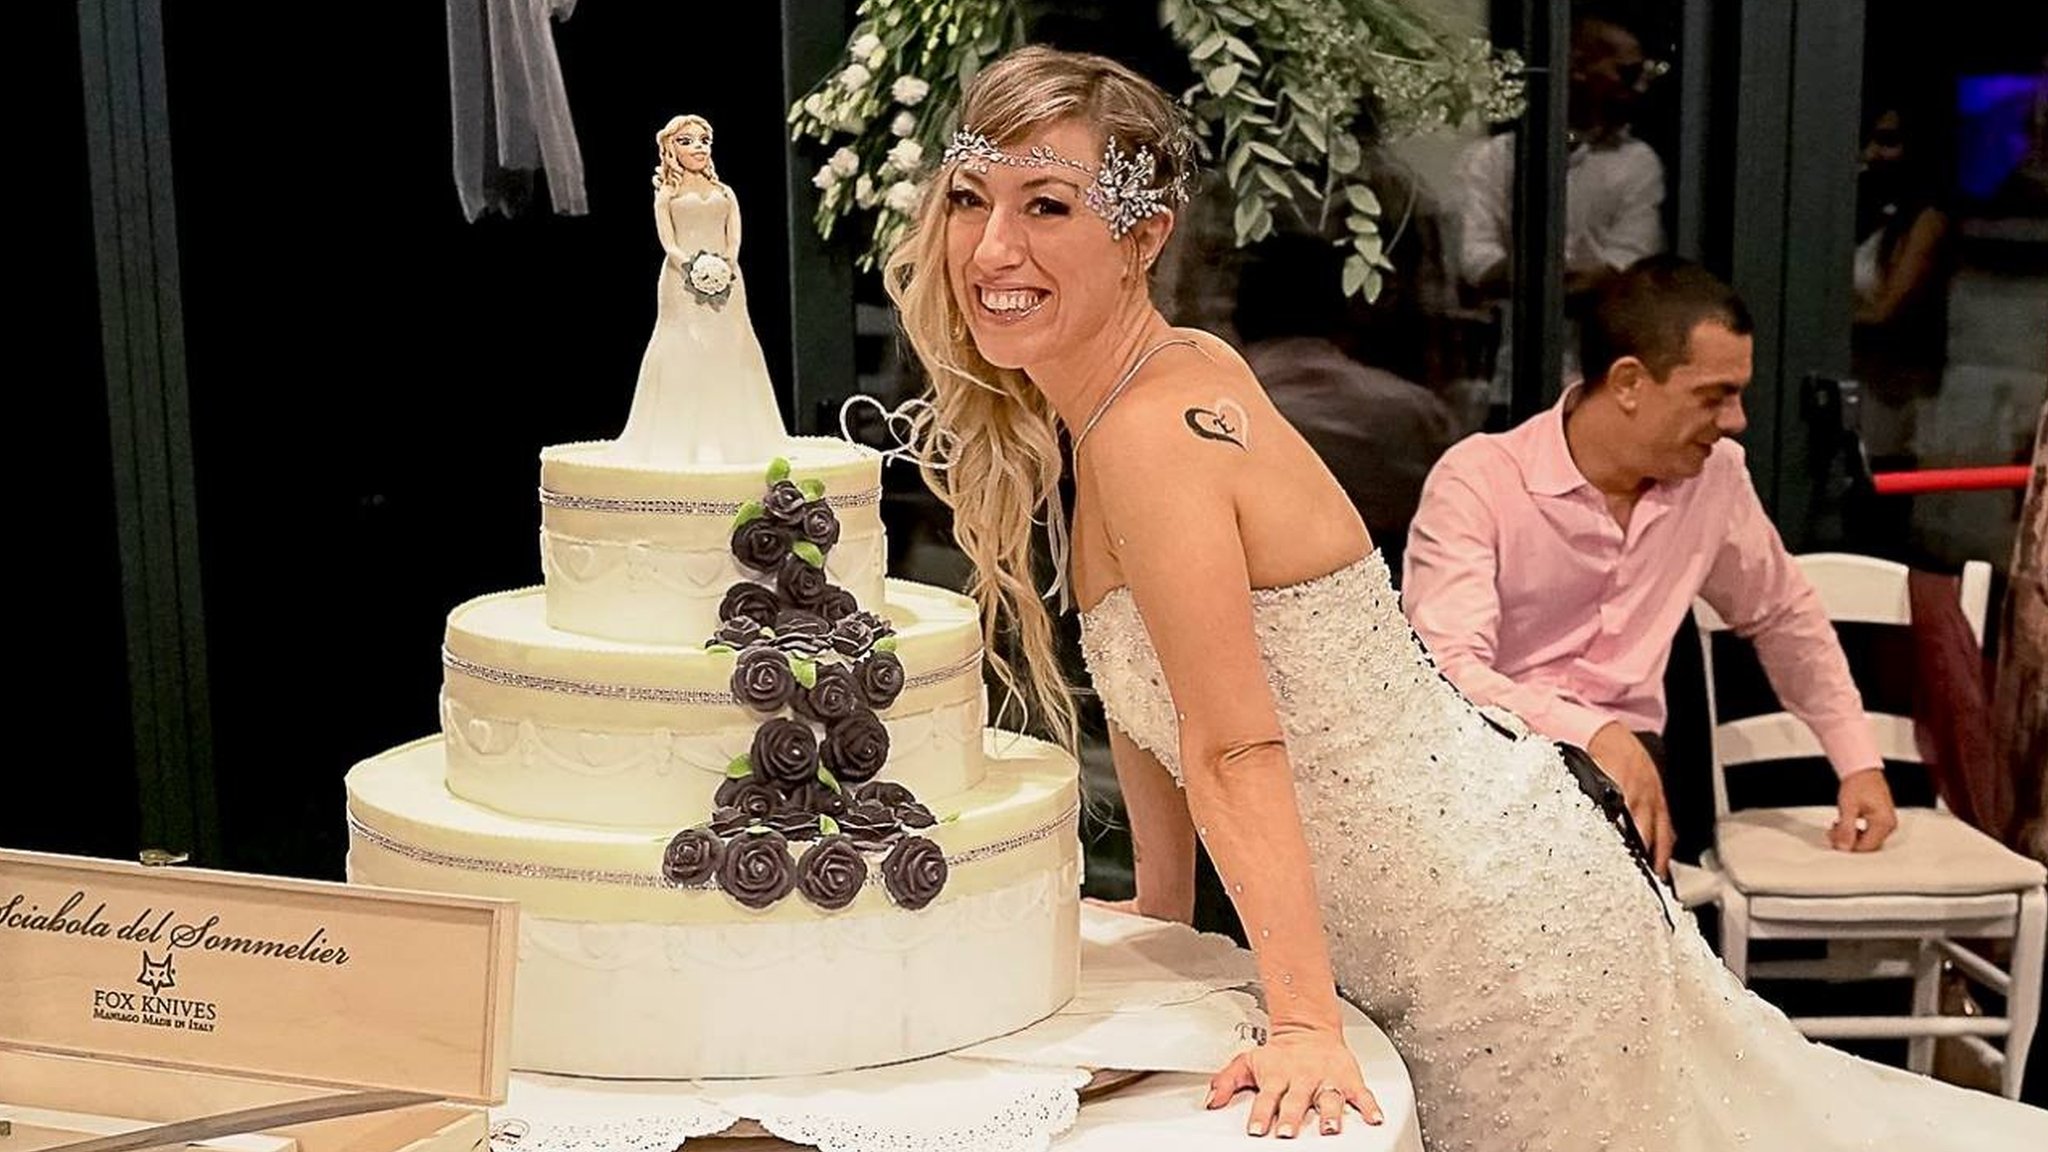 Italy woman marries herself in fairytale without prince image